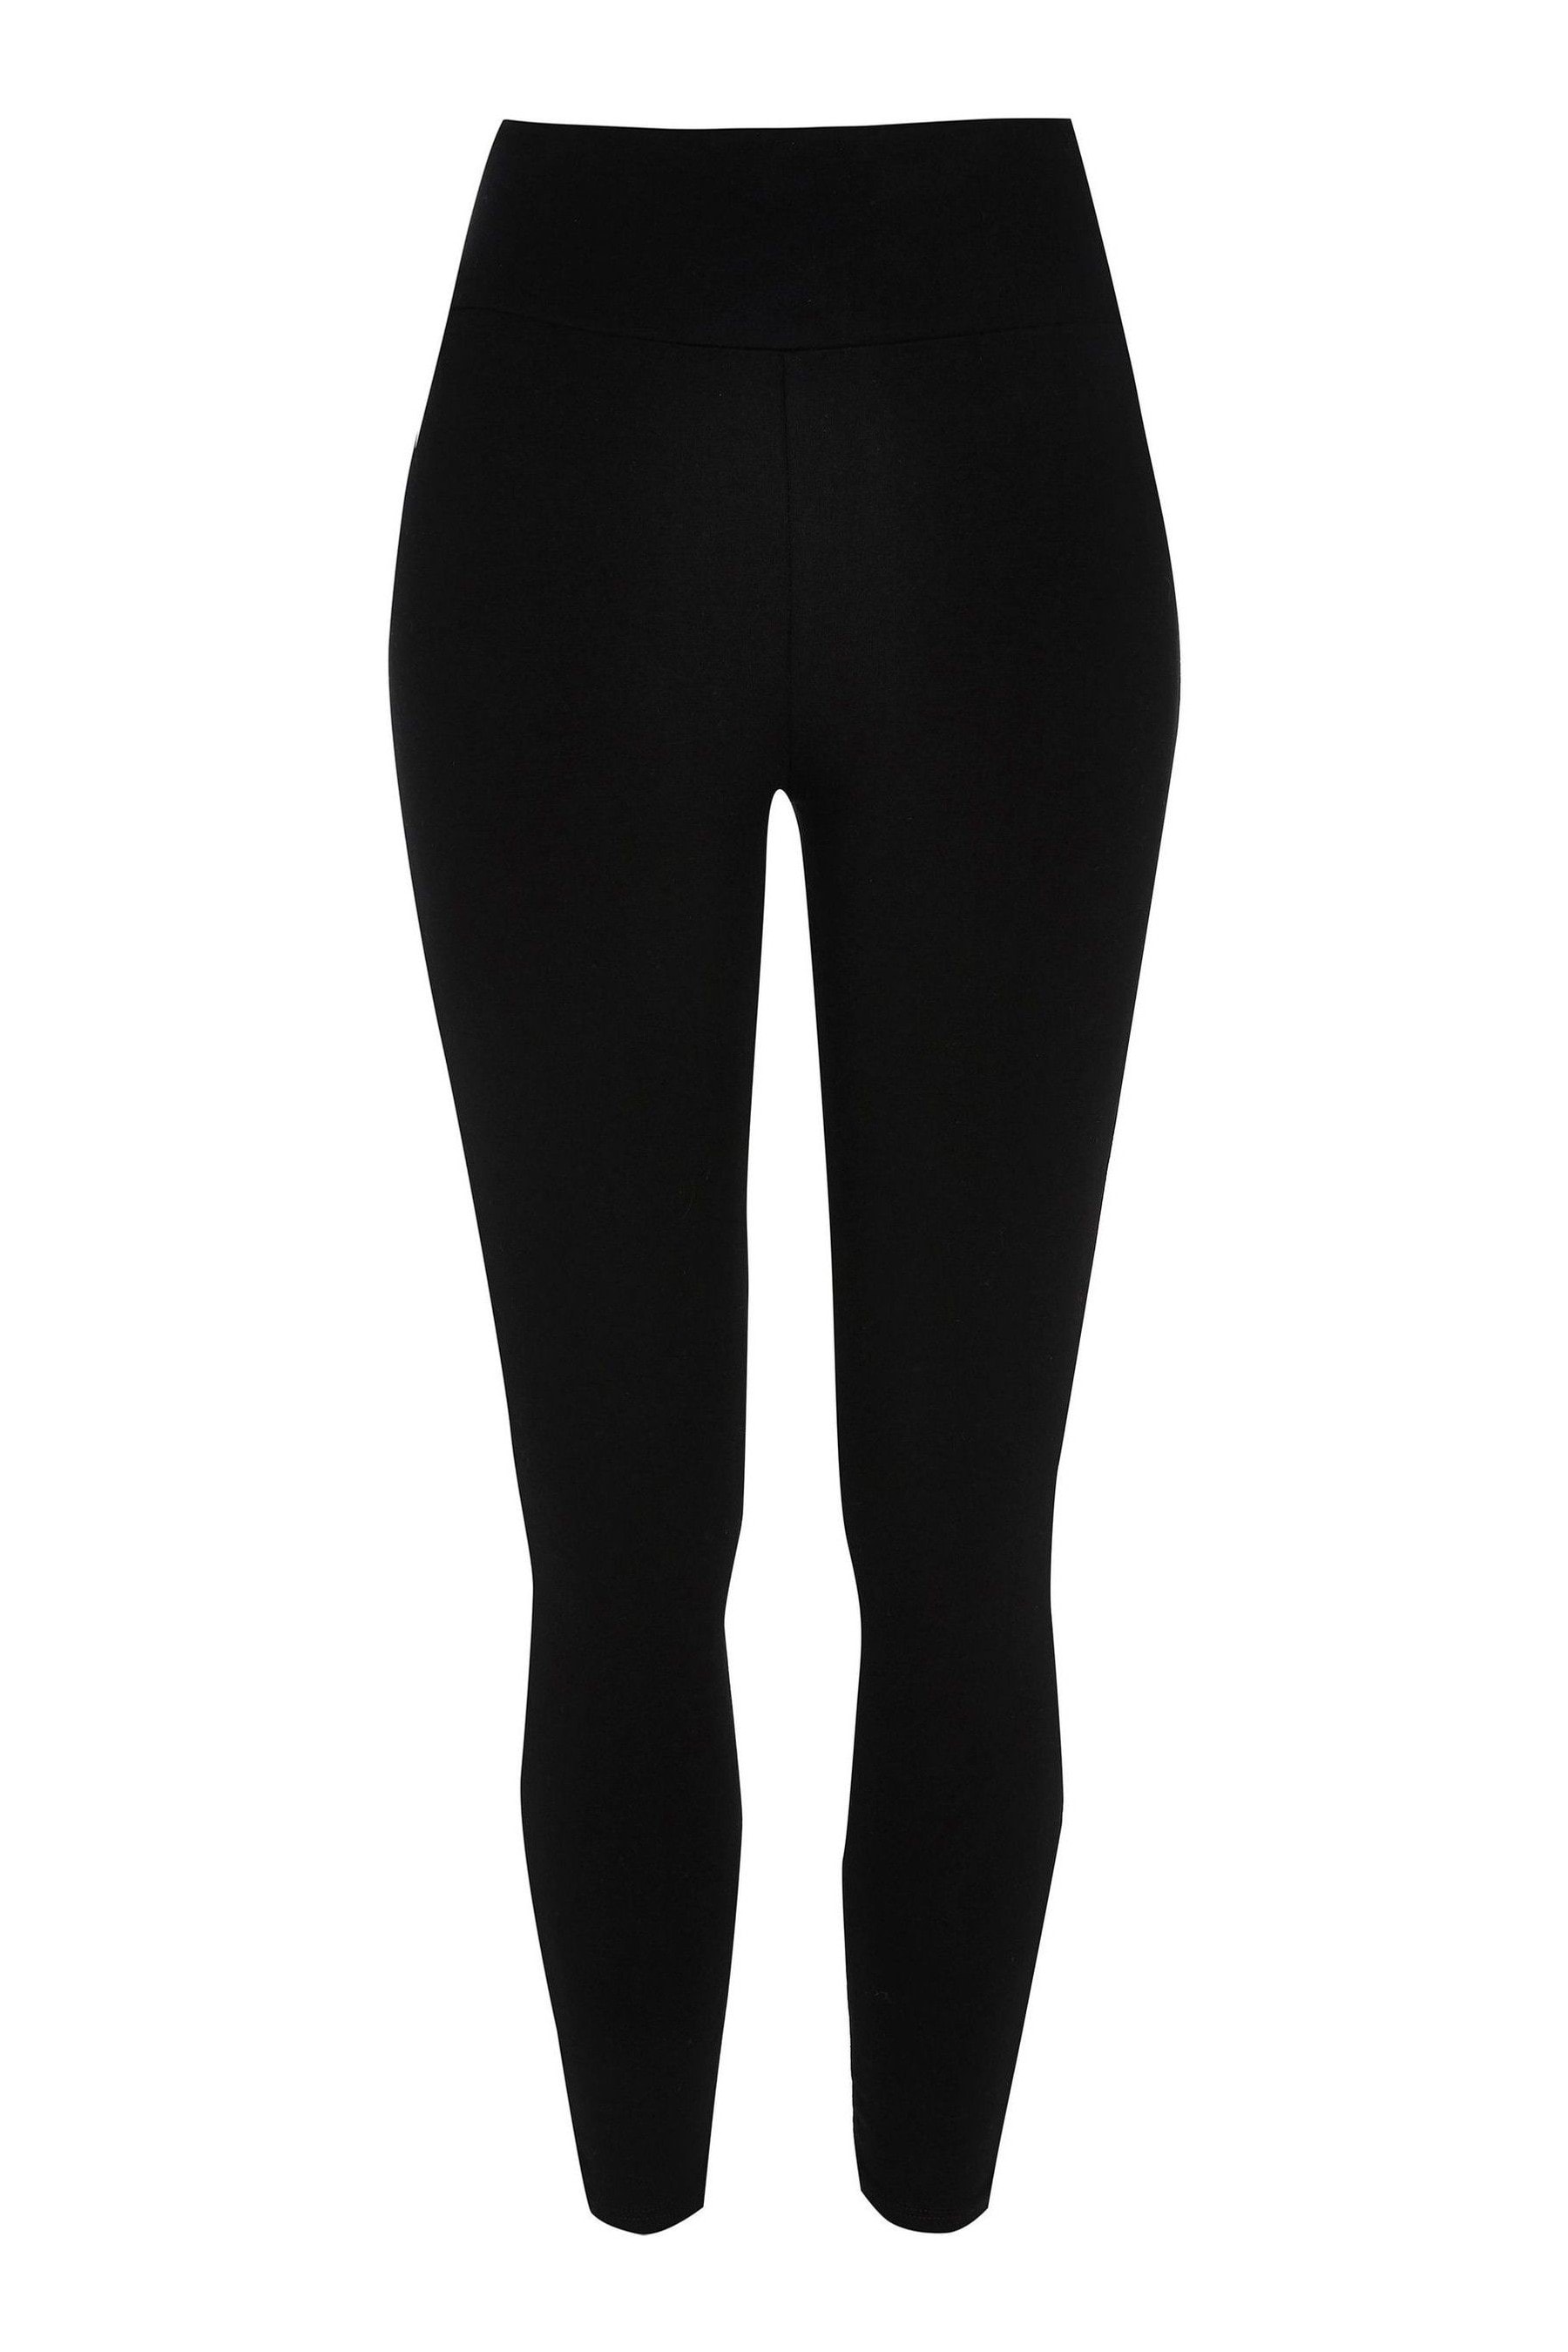 Black Petite Large Bootcut Yoga Pants  International Society of Precision  Agriculture